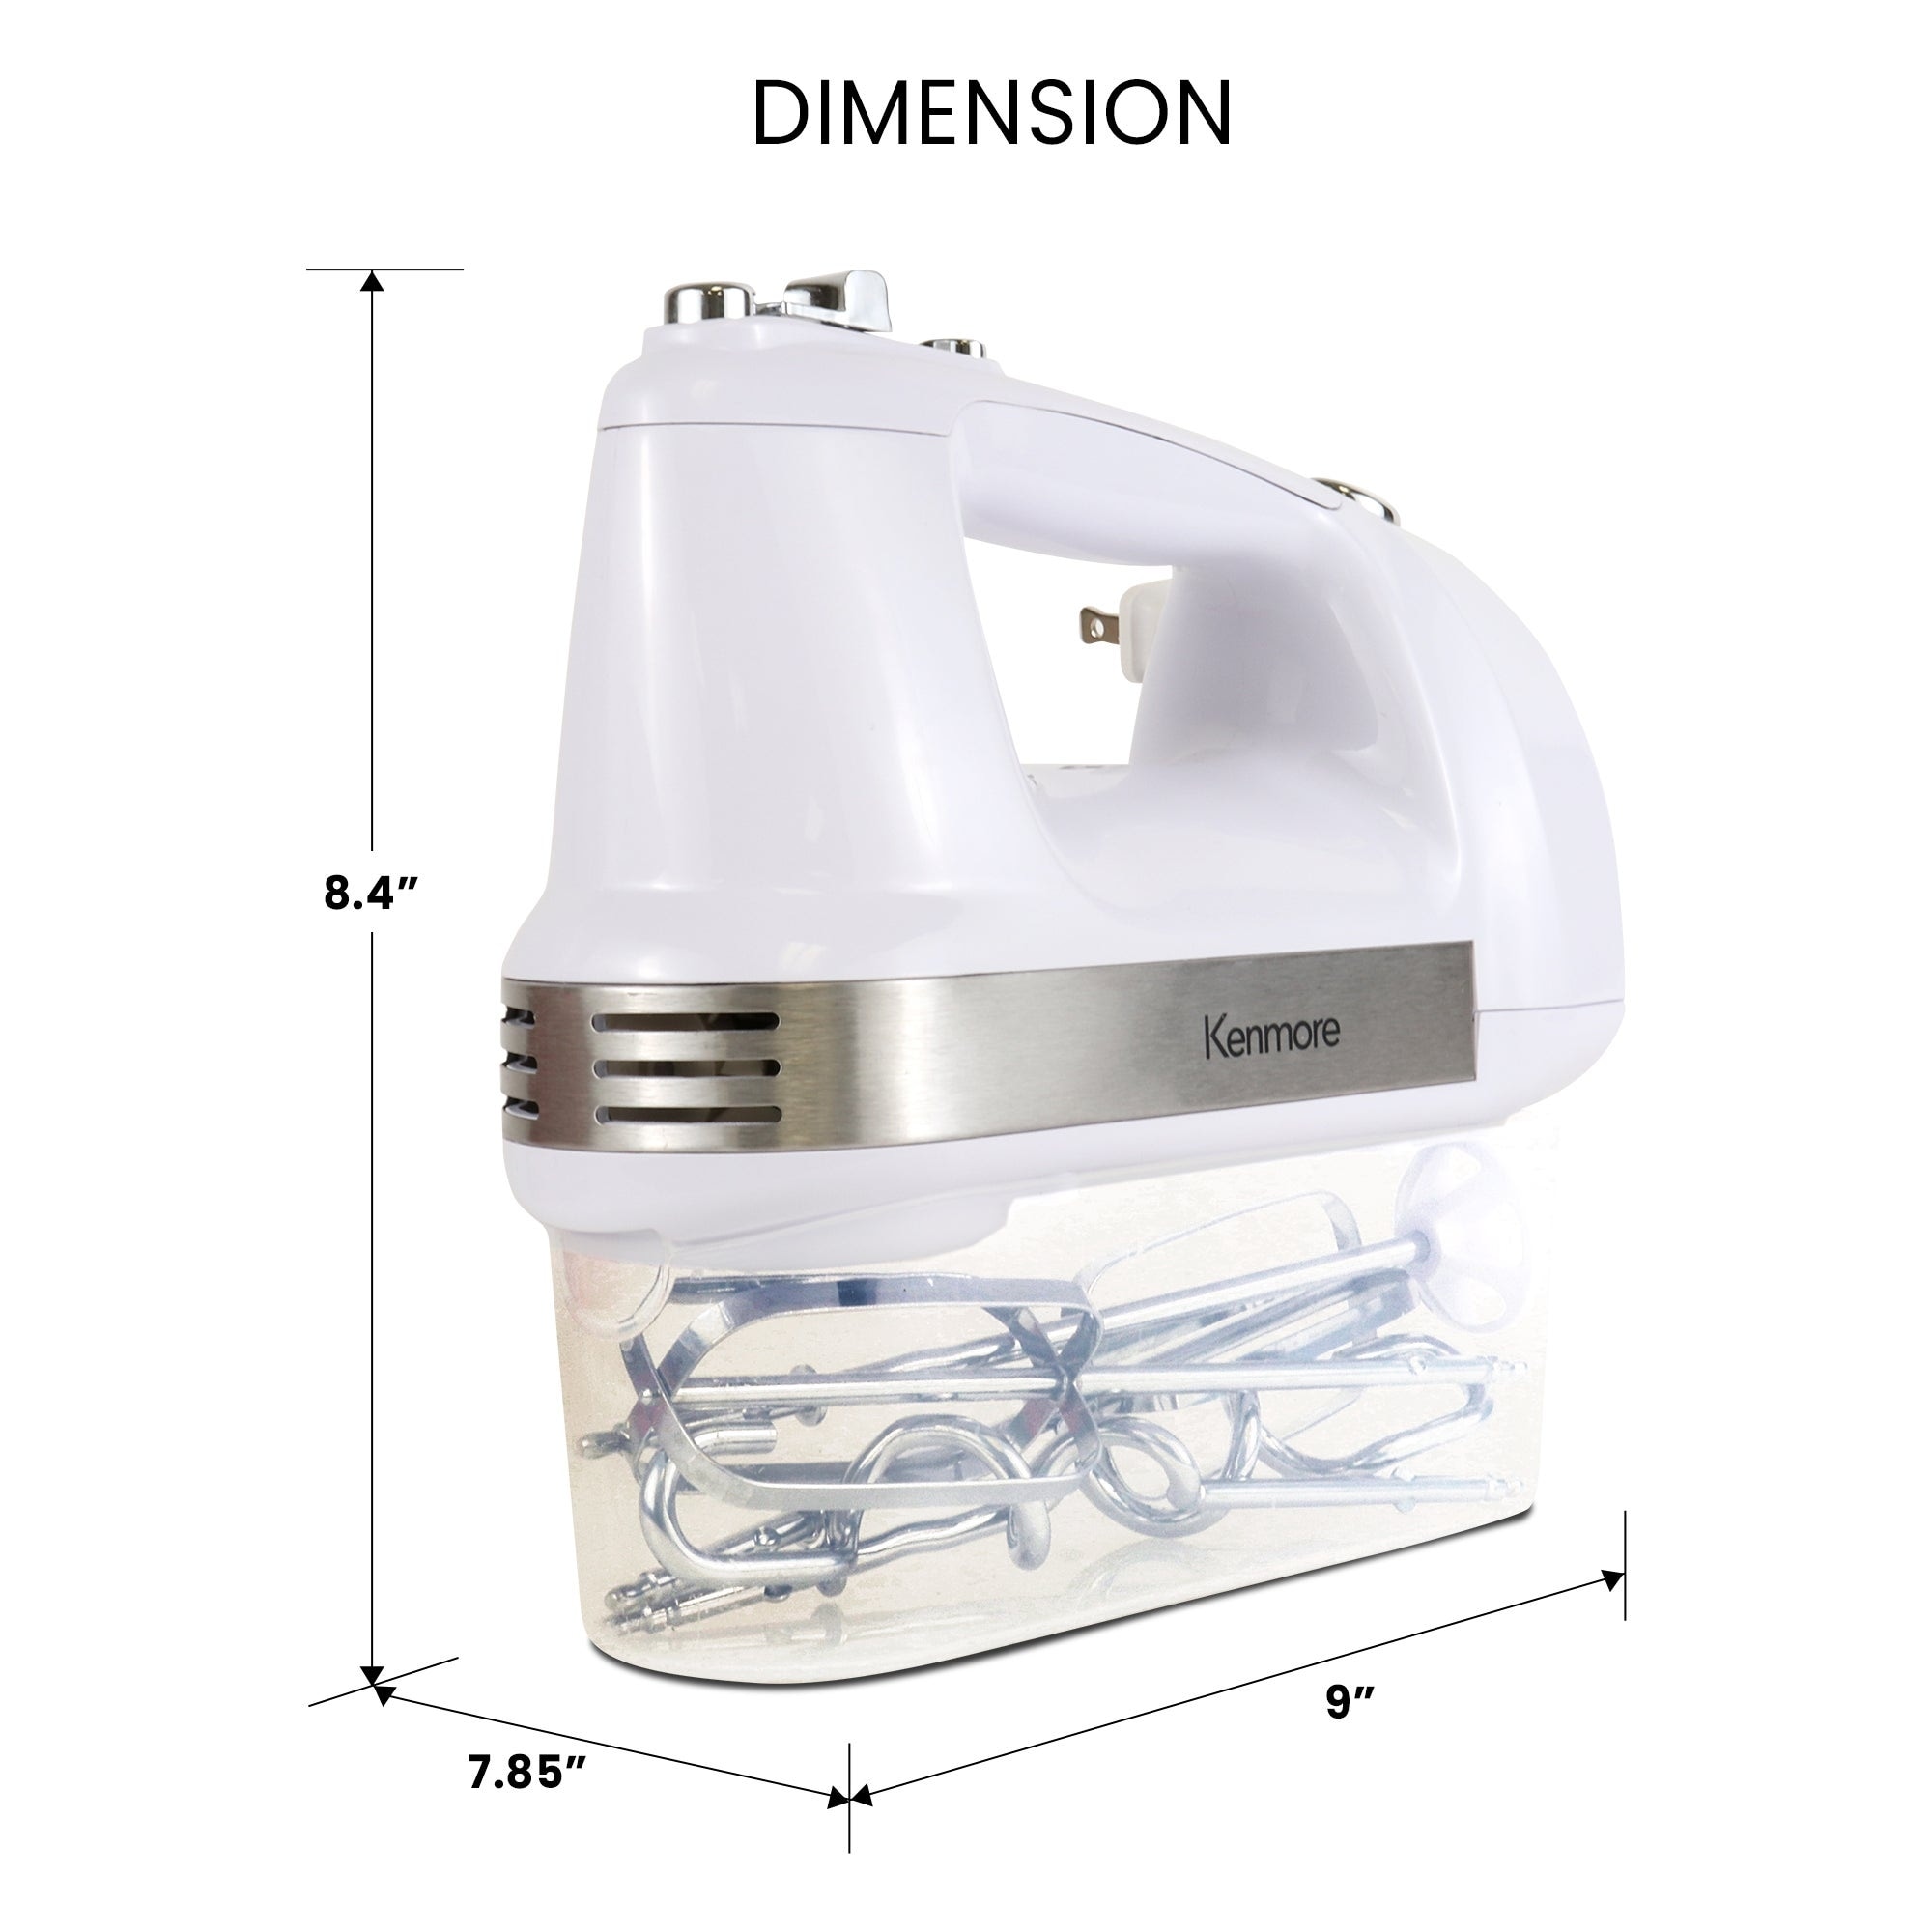 Hand Mixer Kitchen Hand Held Electric Mixers,250W Powerful with 5